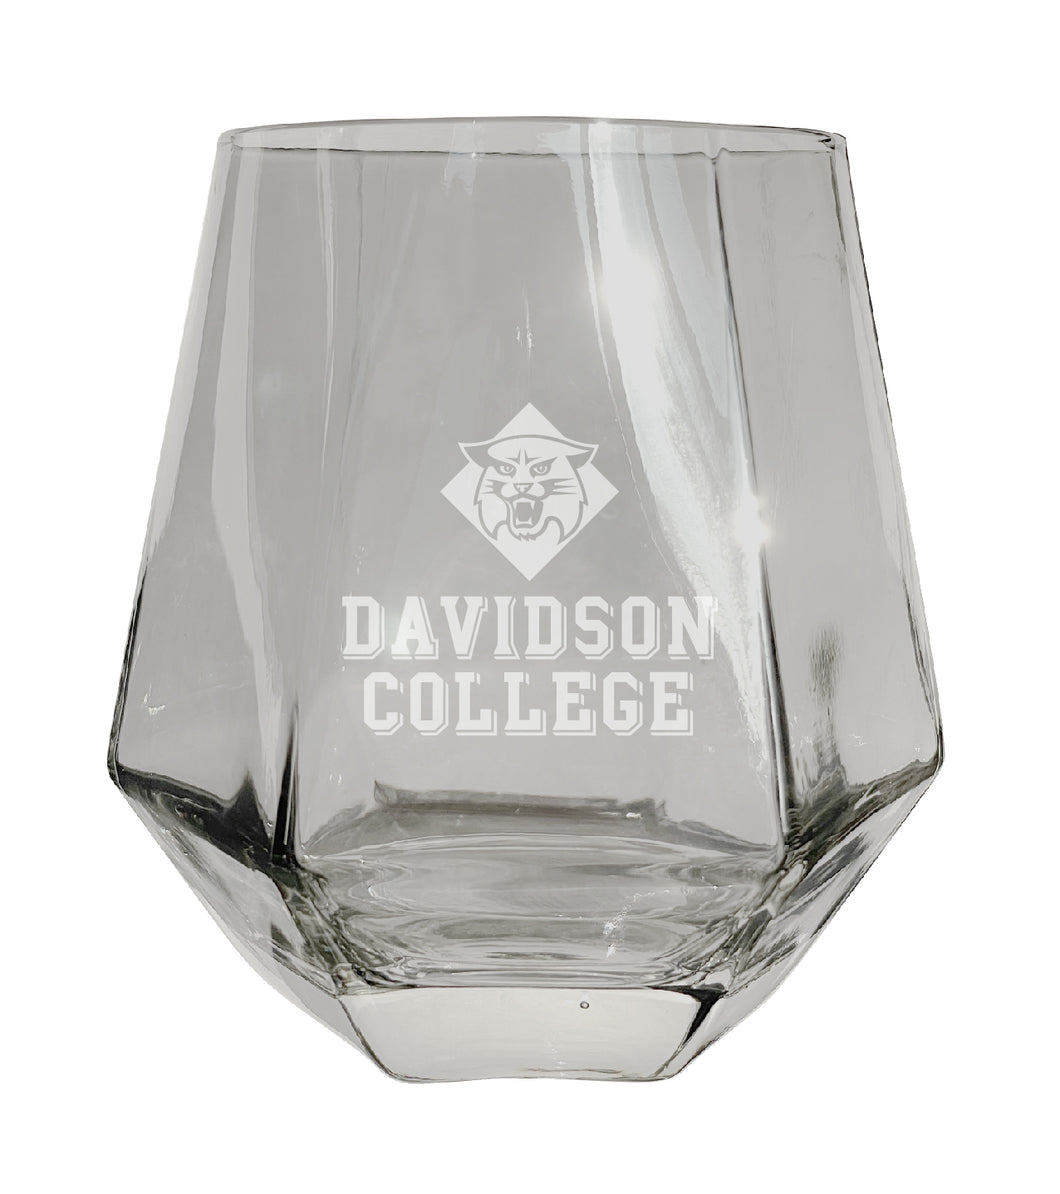 Davidson College Tigers Etched Diamond Cut 10 oz Stemless Wine Glass - NCAA Licensed